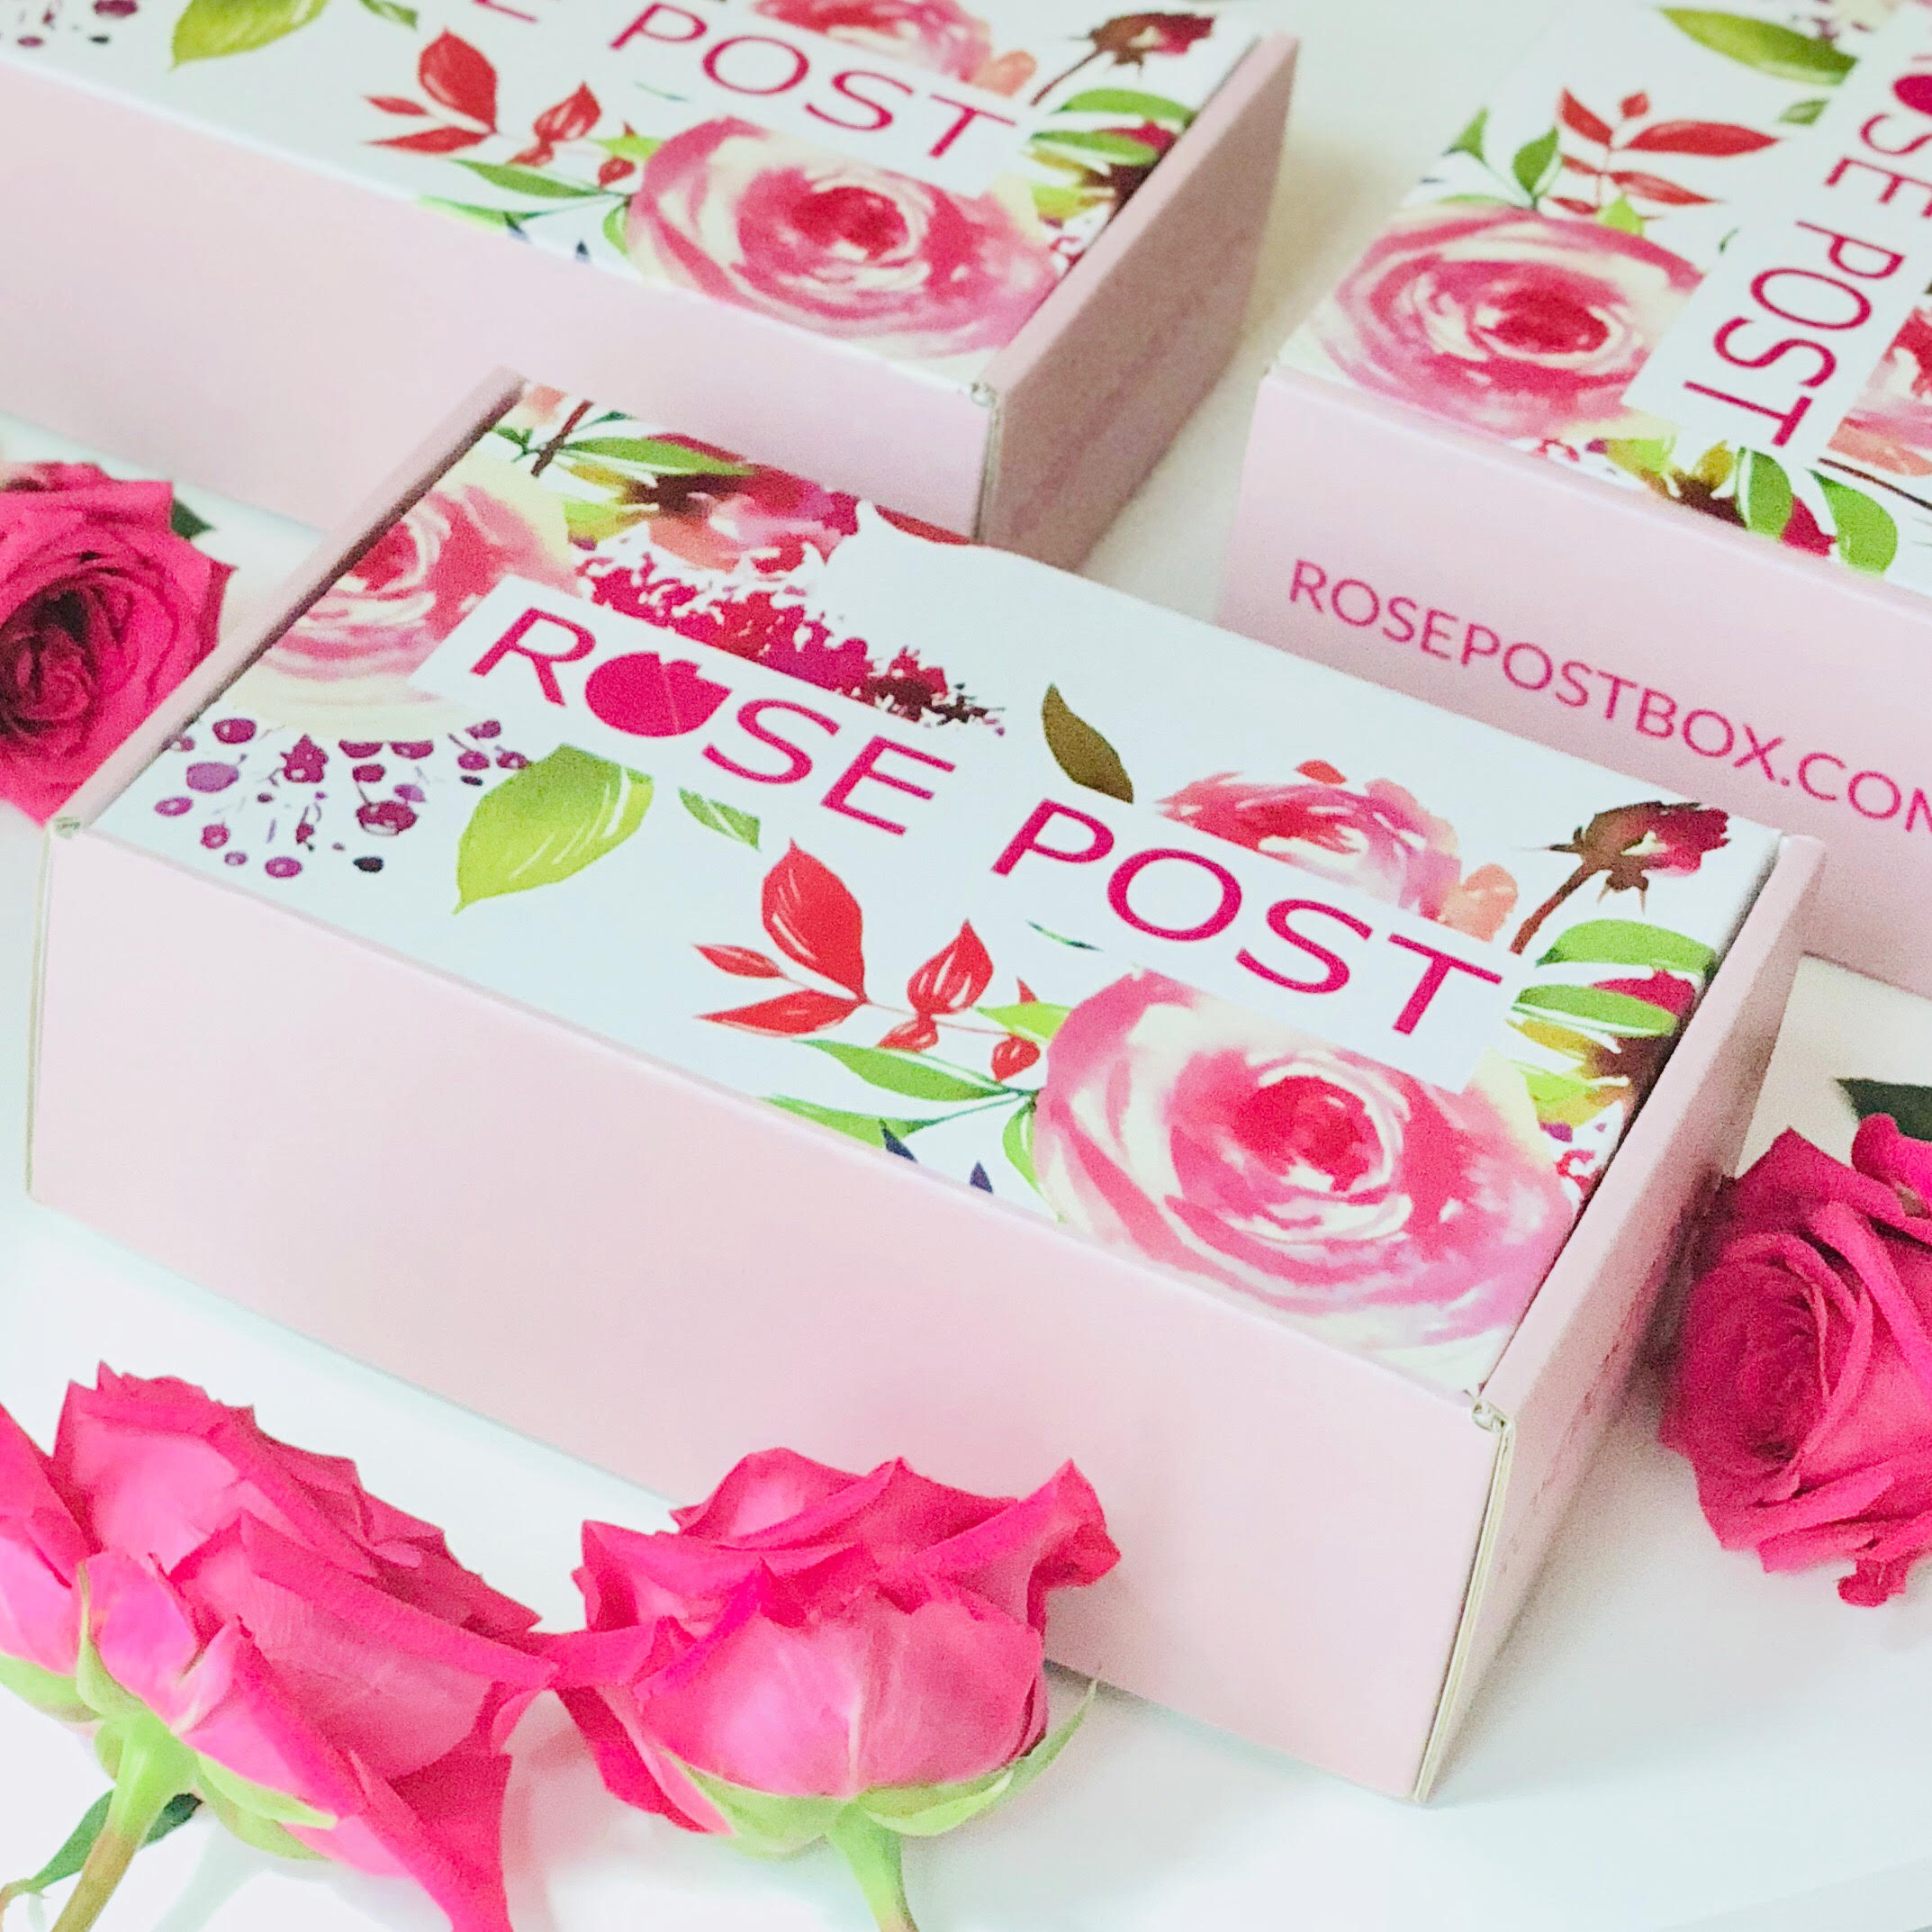 RosePost Box Labor Day Sale – 20% Off Gift Boxes + Shop Purchases!